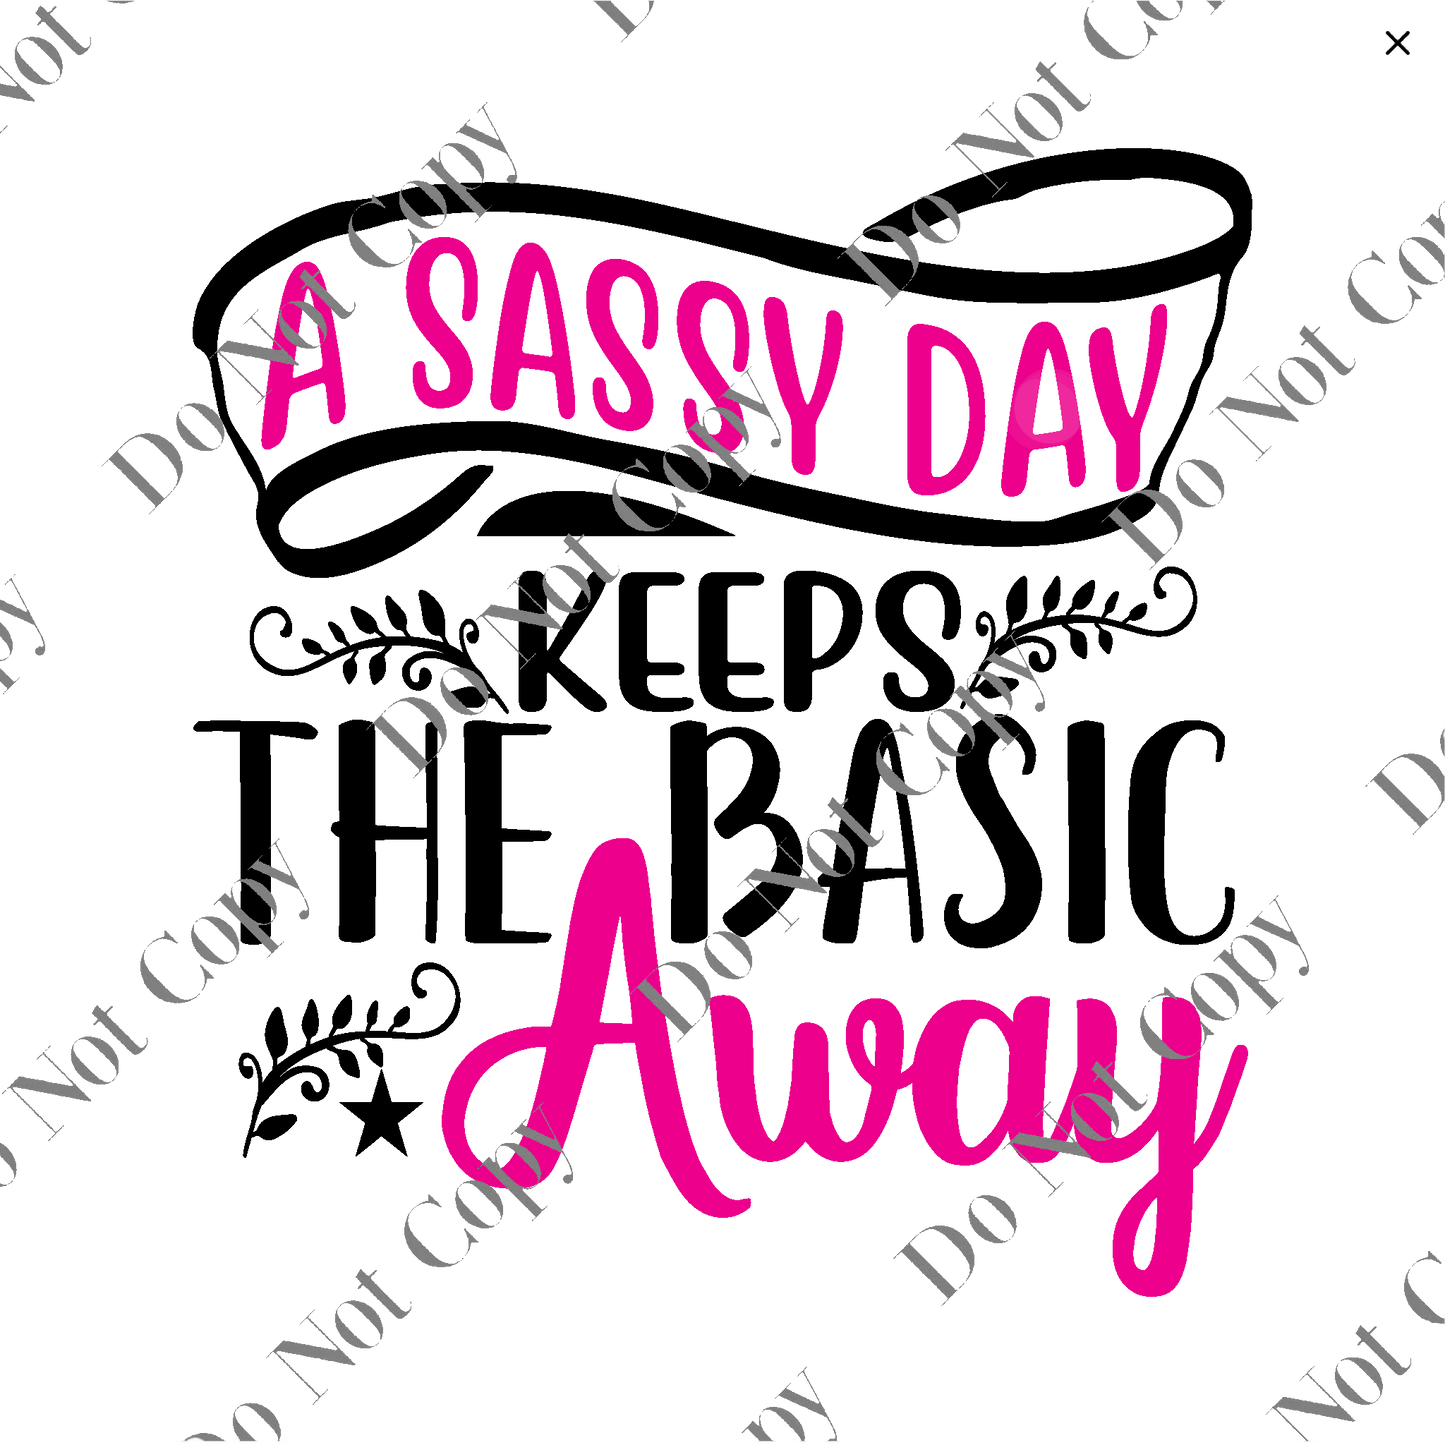 Clear cast Decal -  Sassy Day